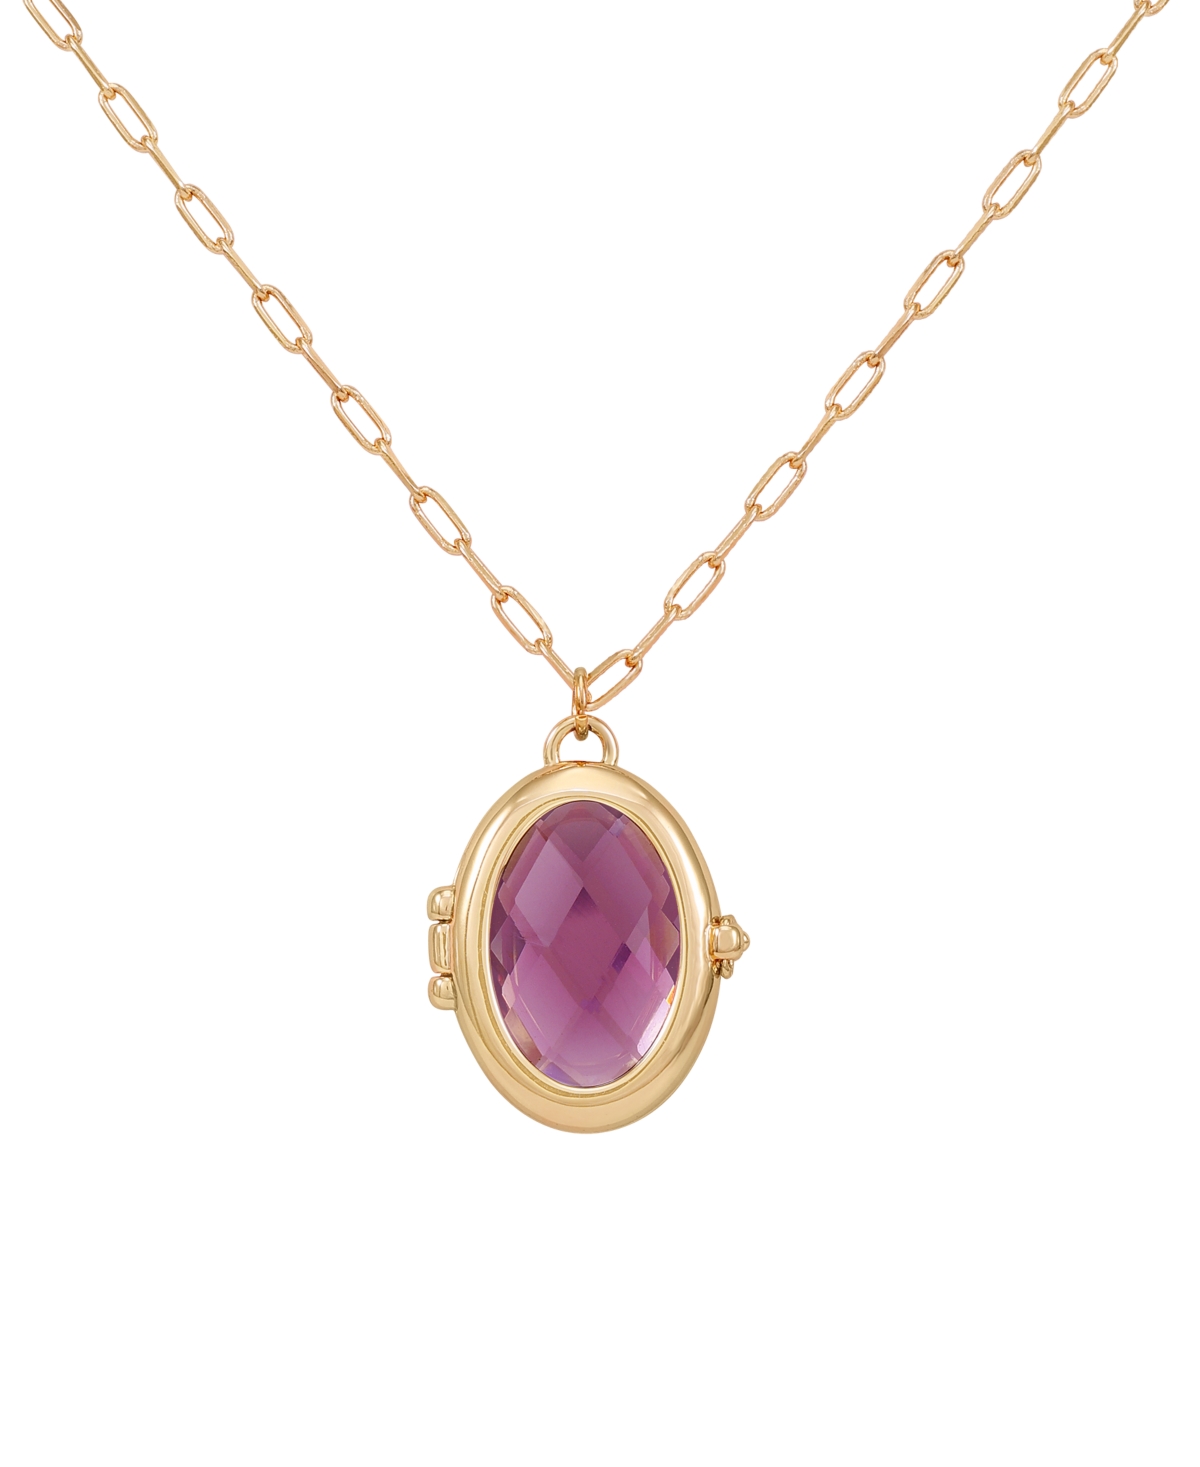 Guess Gold-tone Removable Stone Oval Locket Pendant Necklace, 18" + 3" Extender In Amy